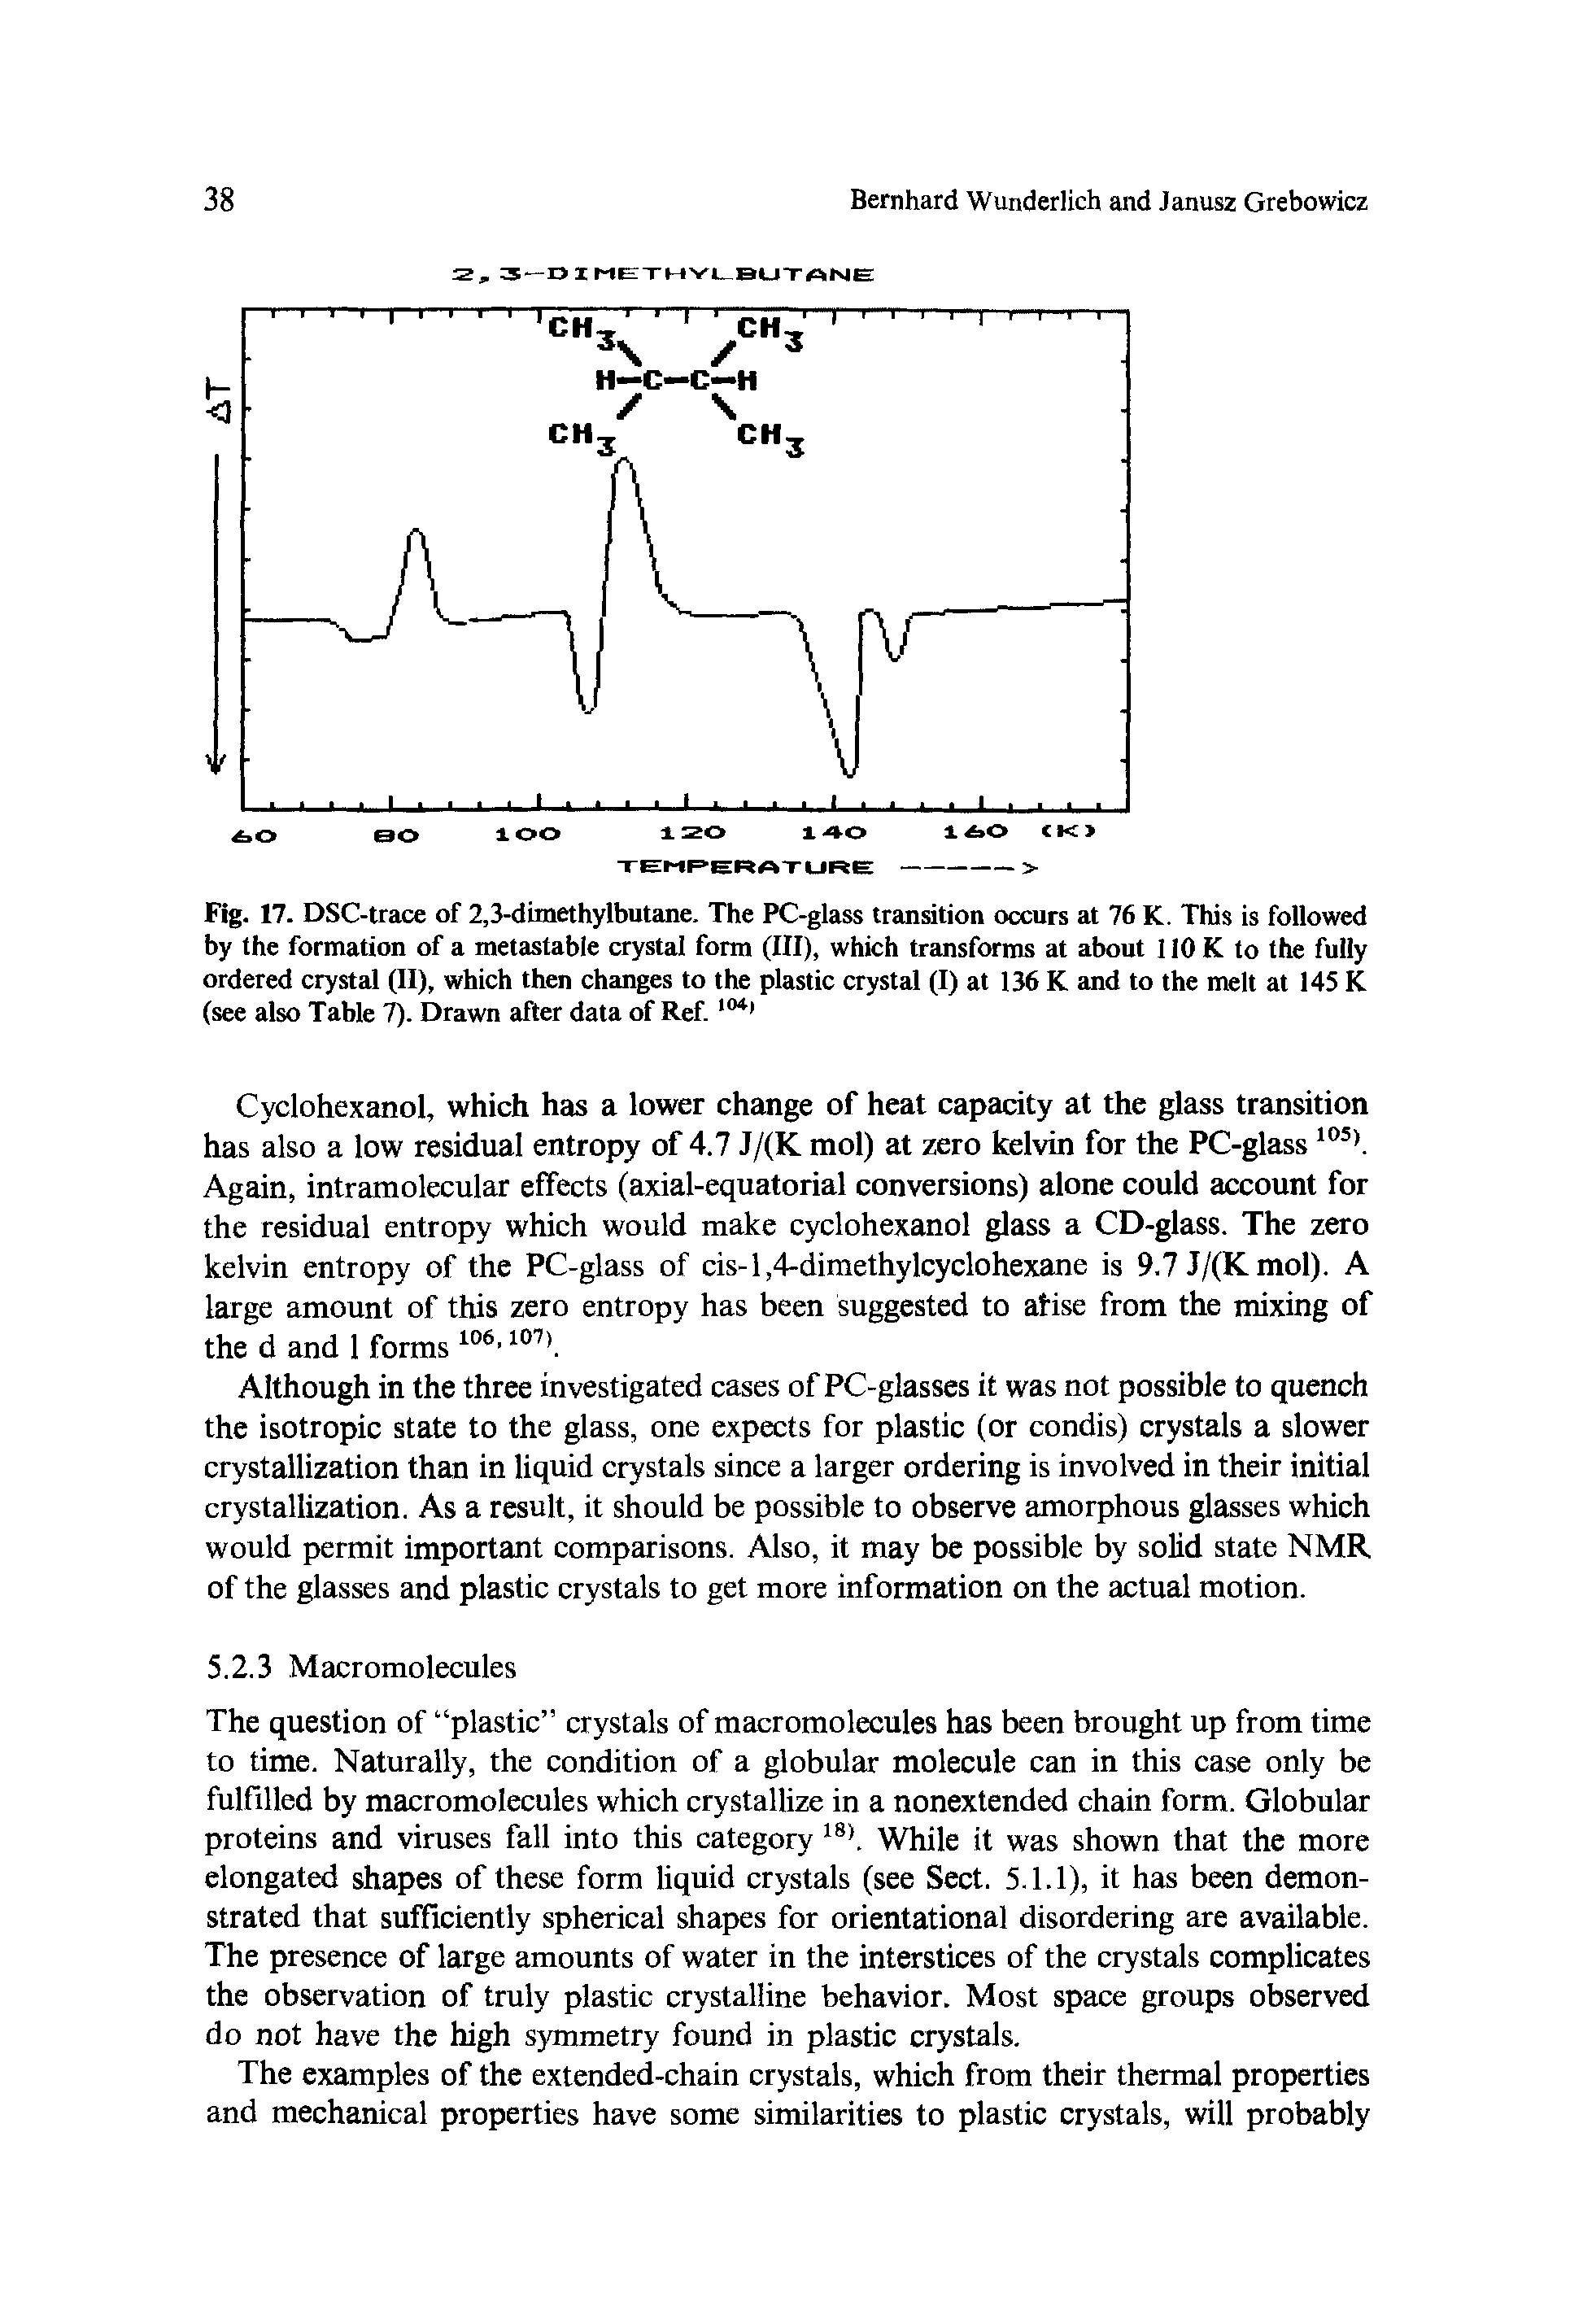 Fig. 17. DSC-trace of 2,3-dimethylbutane. The PC-glass transition occurs at 76 K. This is followed by the formation of a metastable crystal form (III), which transforms at about 110 K to the fully ordered crystal (II), which then changes to the plastic crystal (I) at 136 K and to the melt at 145 K (see also Table 7). Drawn after data of Ref. 1041...